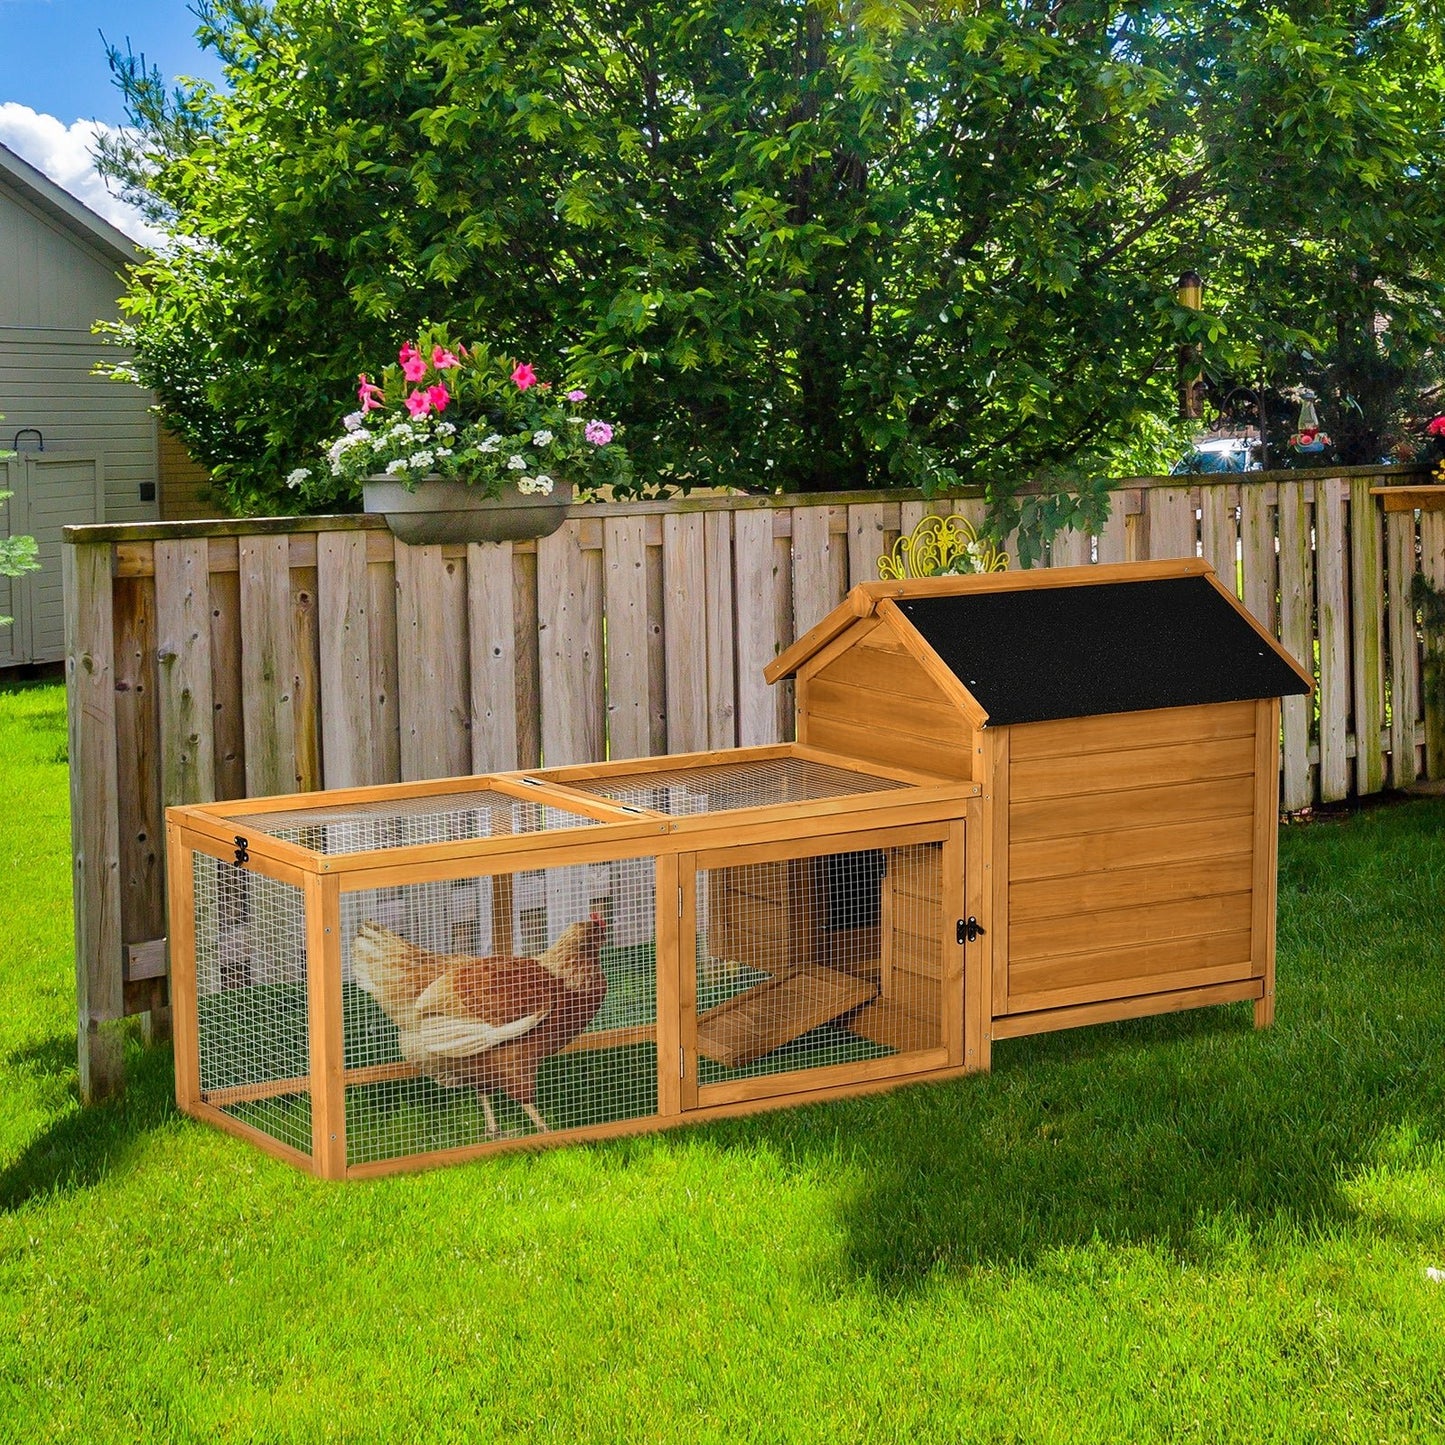 2-Tier Chicken Coop, Wooden Hen House, Poultry Habitat Outdoor Backyard with Removable Tray, Nesting Box, Outside Run, Ramp, 71"x36"x31" at Gallery Canada